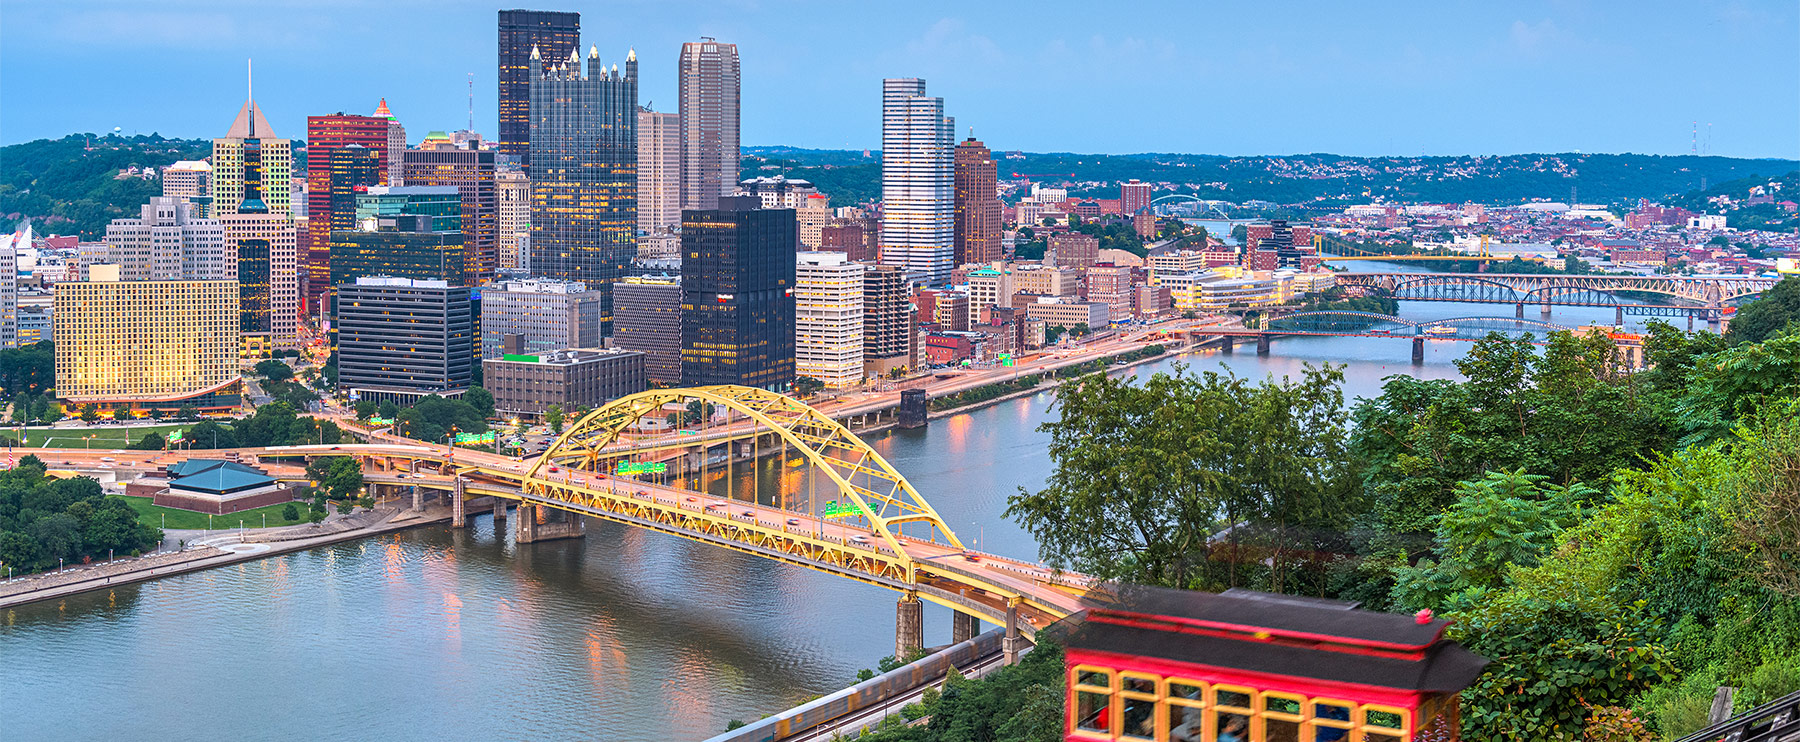 pittsburgh pennsylvania downtown skyline overview of the bridge